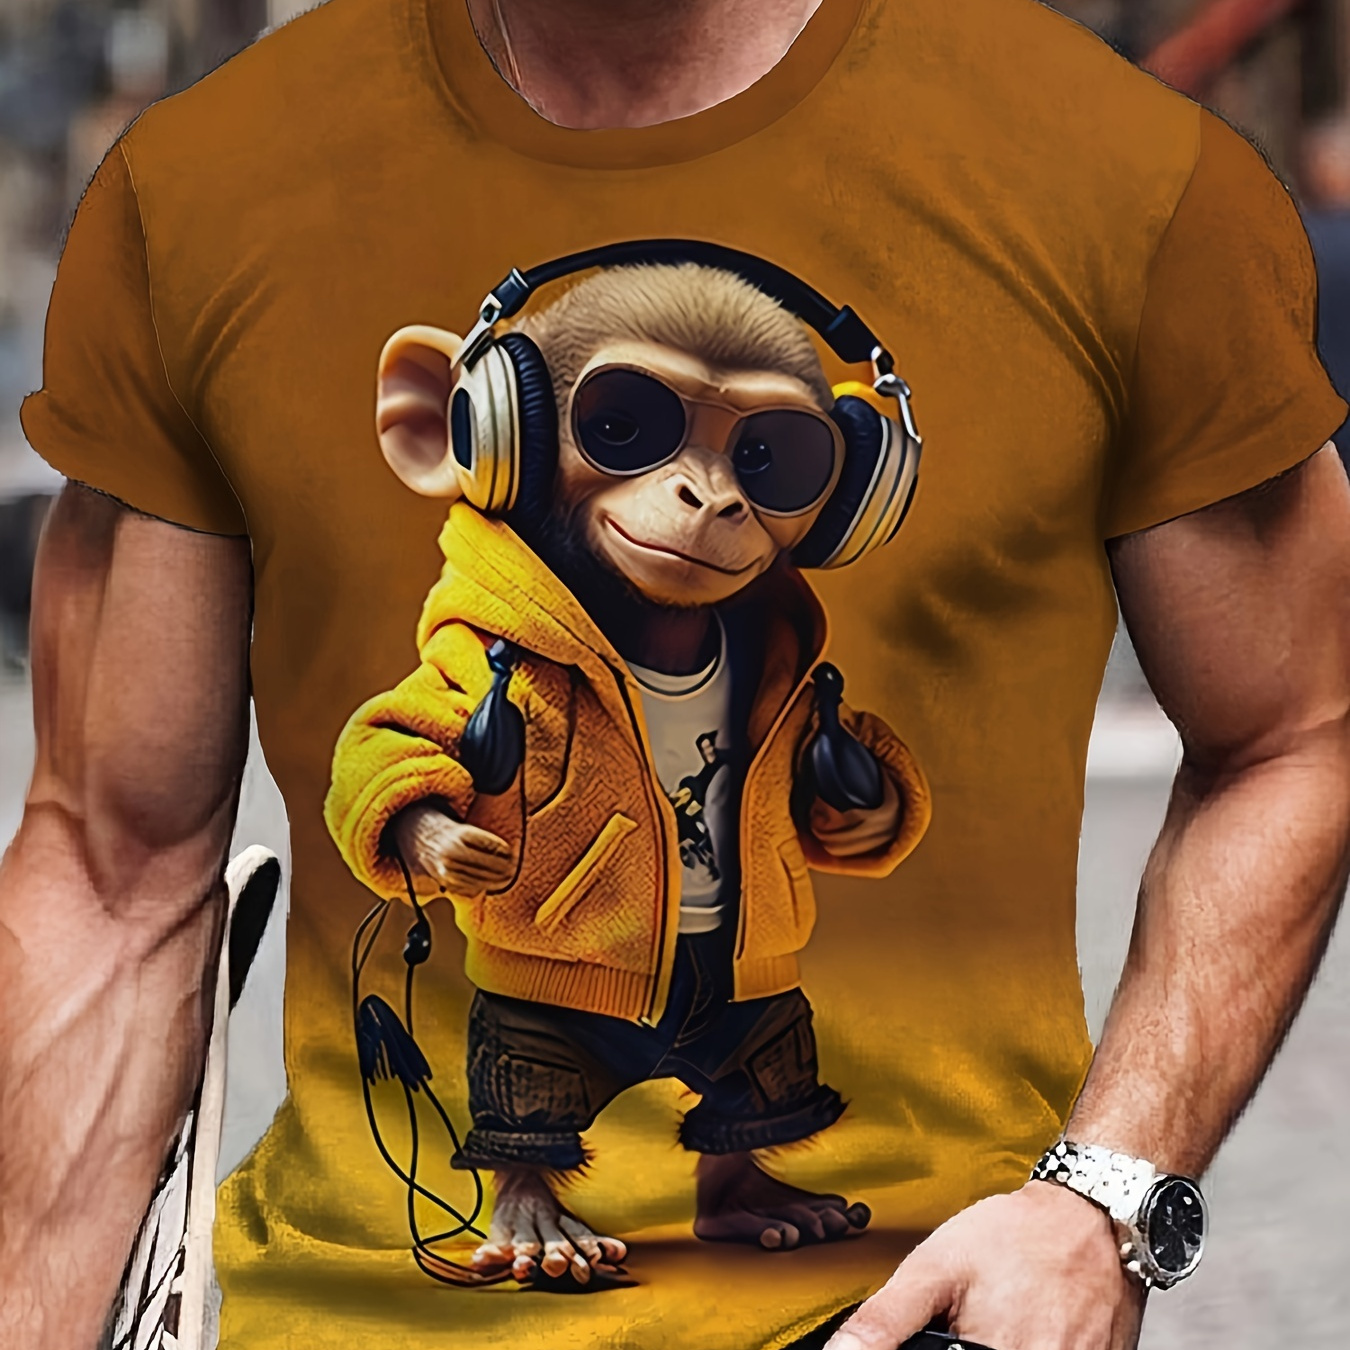 

3d Digital Animation Style Monkey With Hoodie And Headphone Pattern T-shirt With Crew Neck And Short Sleeve, Novel And Funny Tops For Men's Summer Street Wear